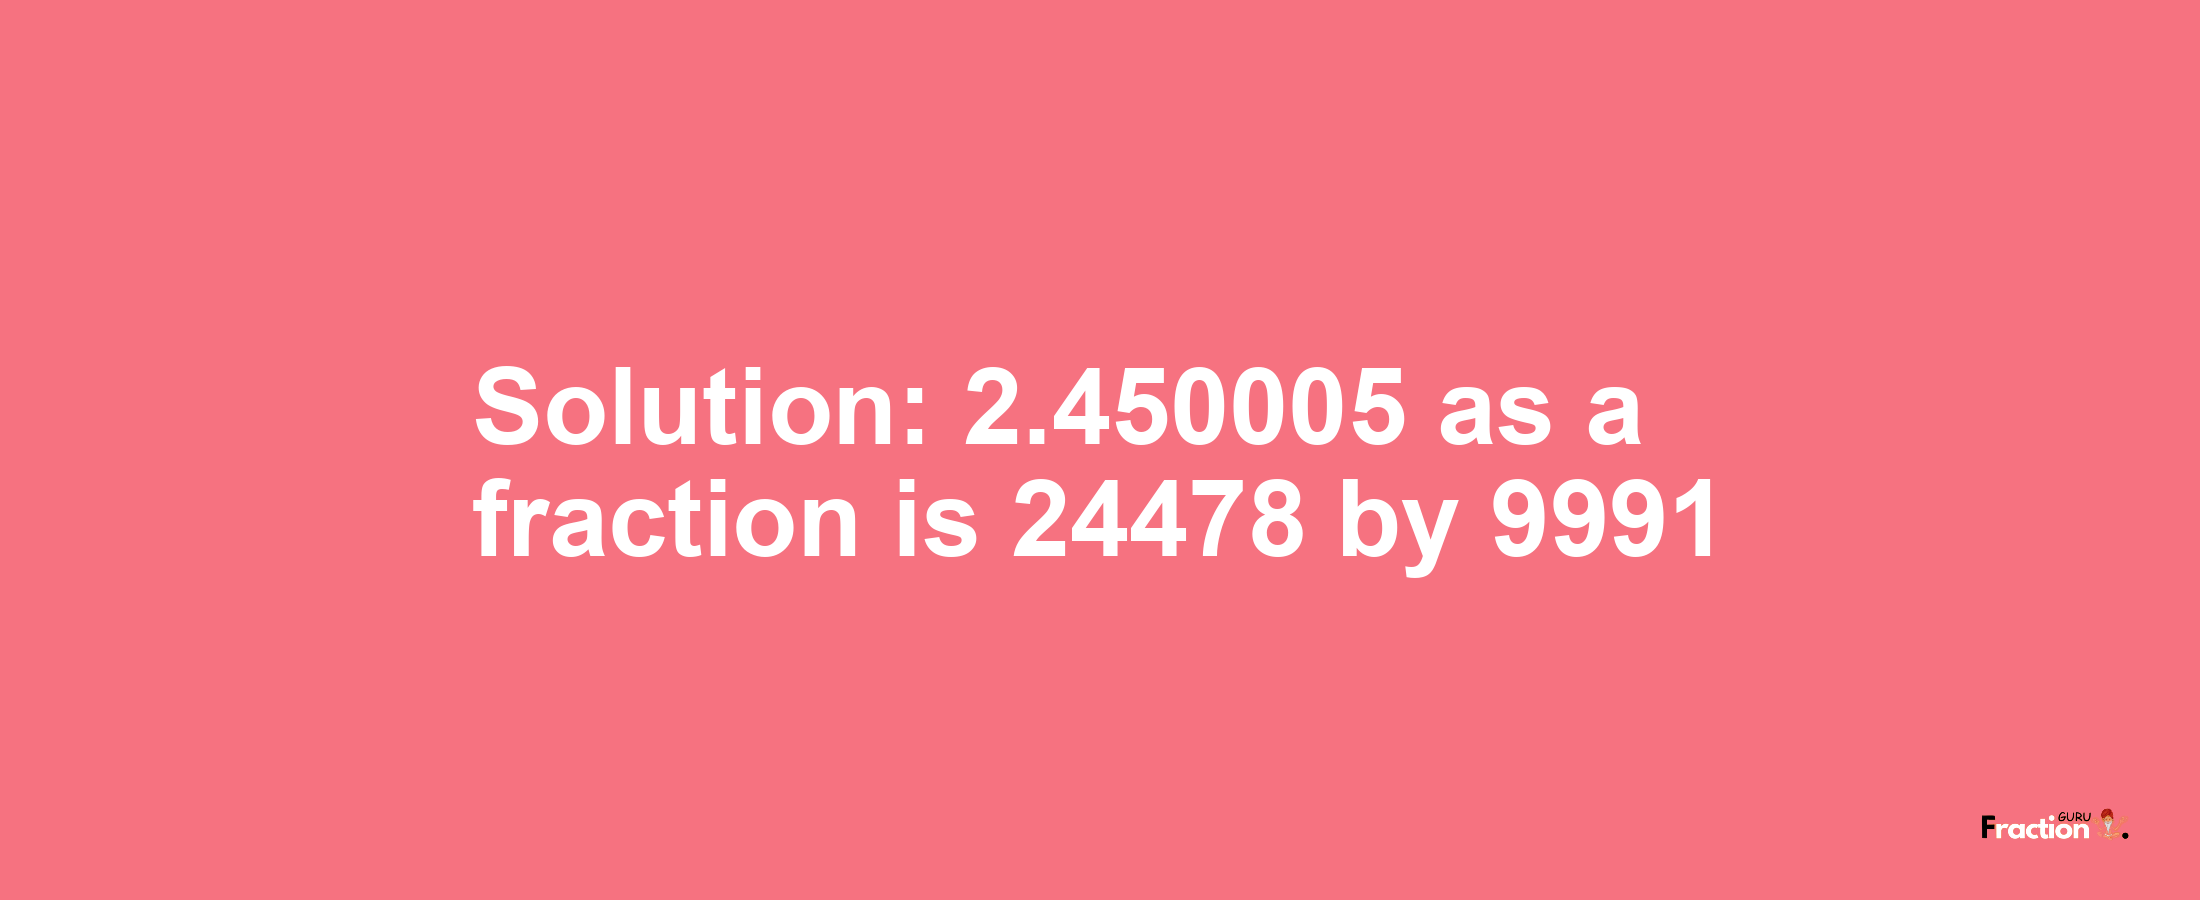 Solution:2.450005 as a fraction is 24478/9991